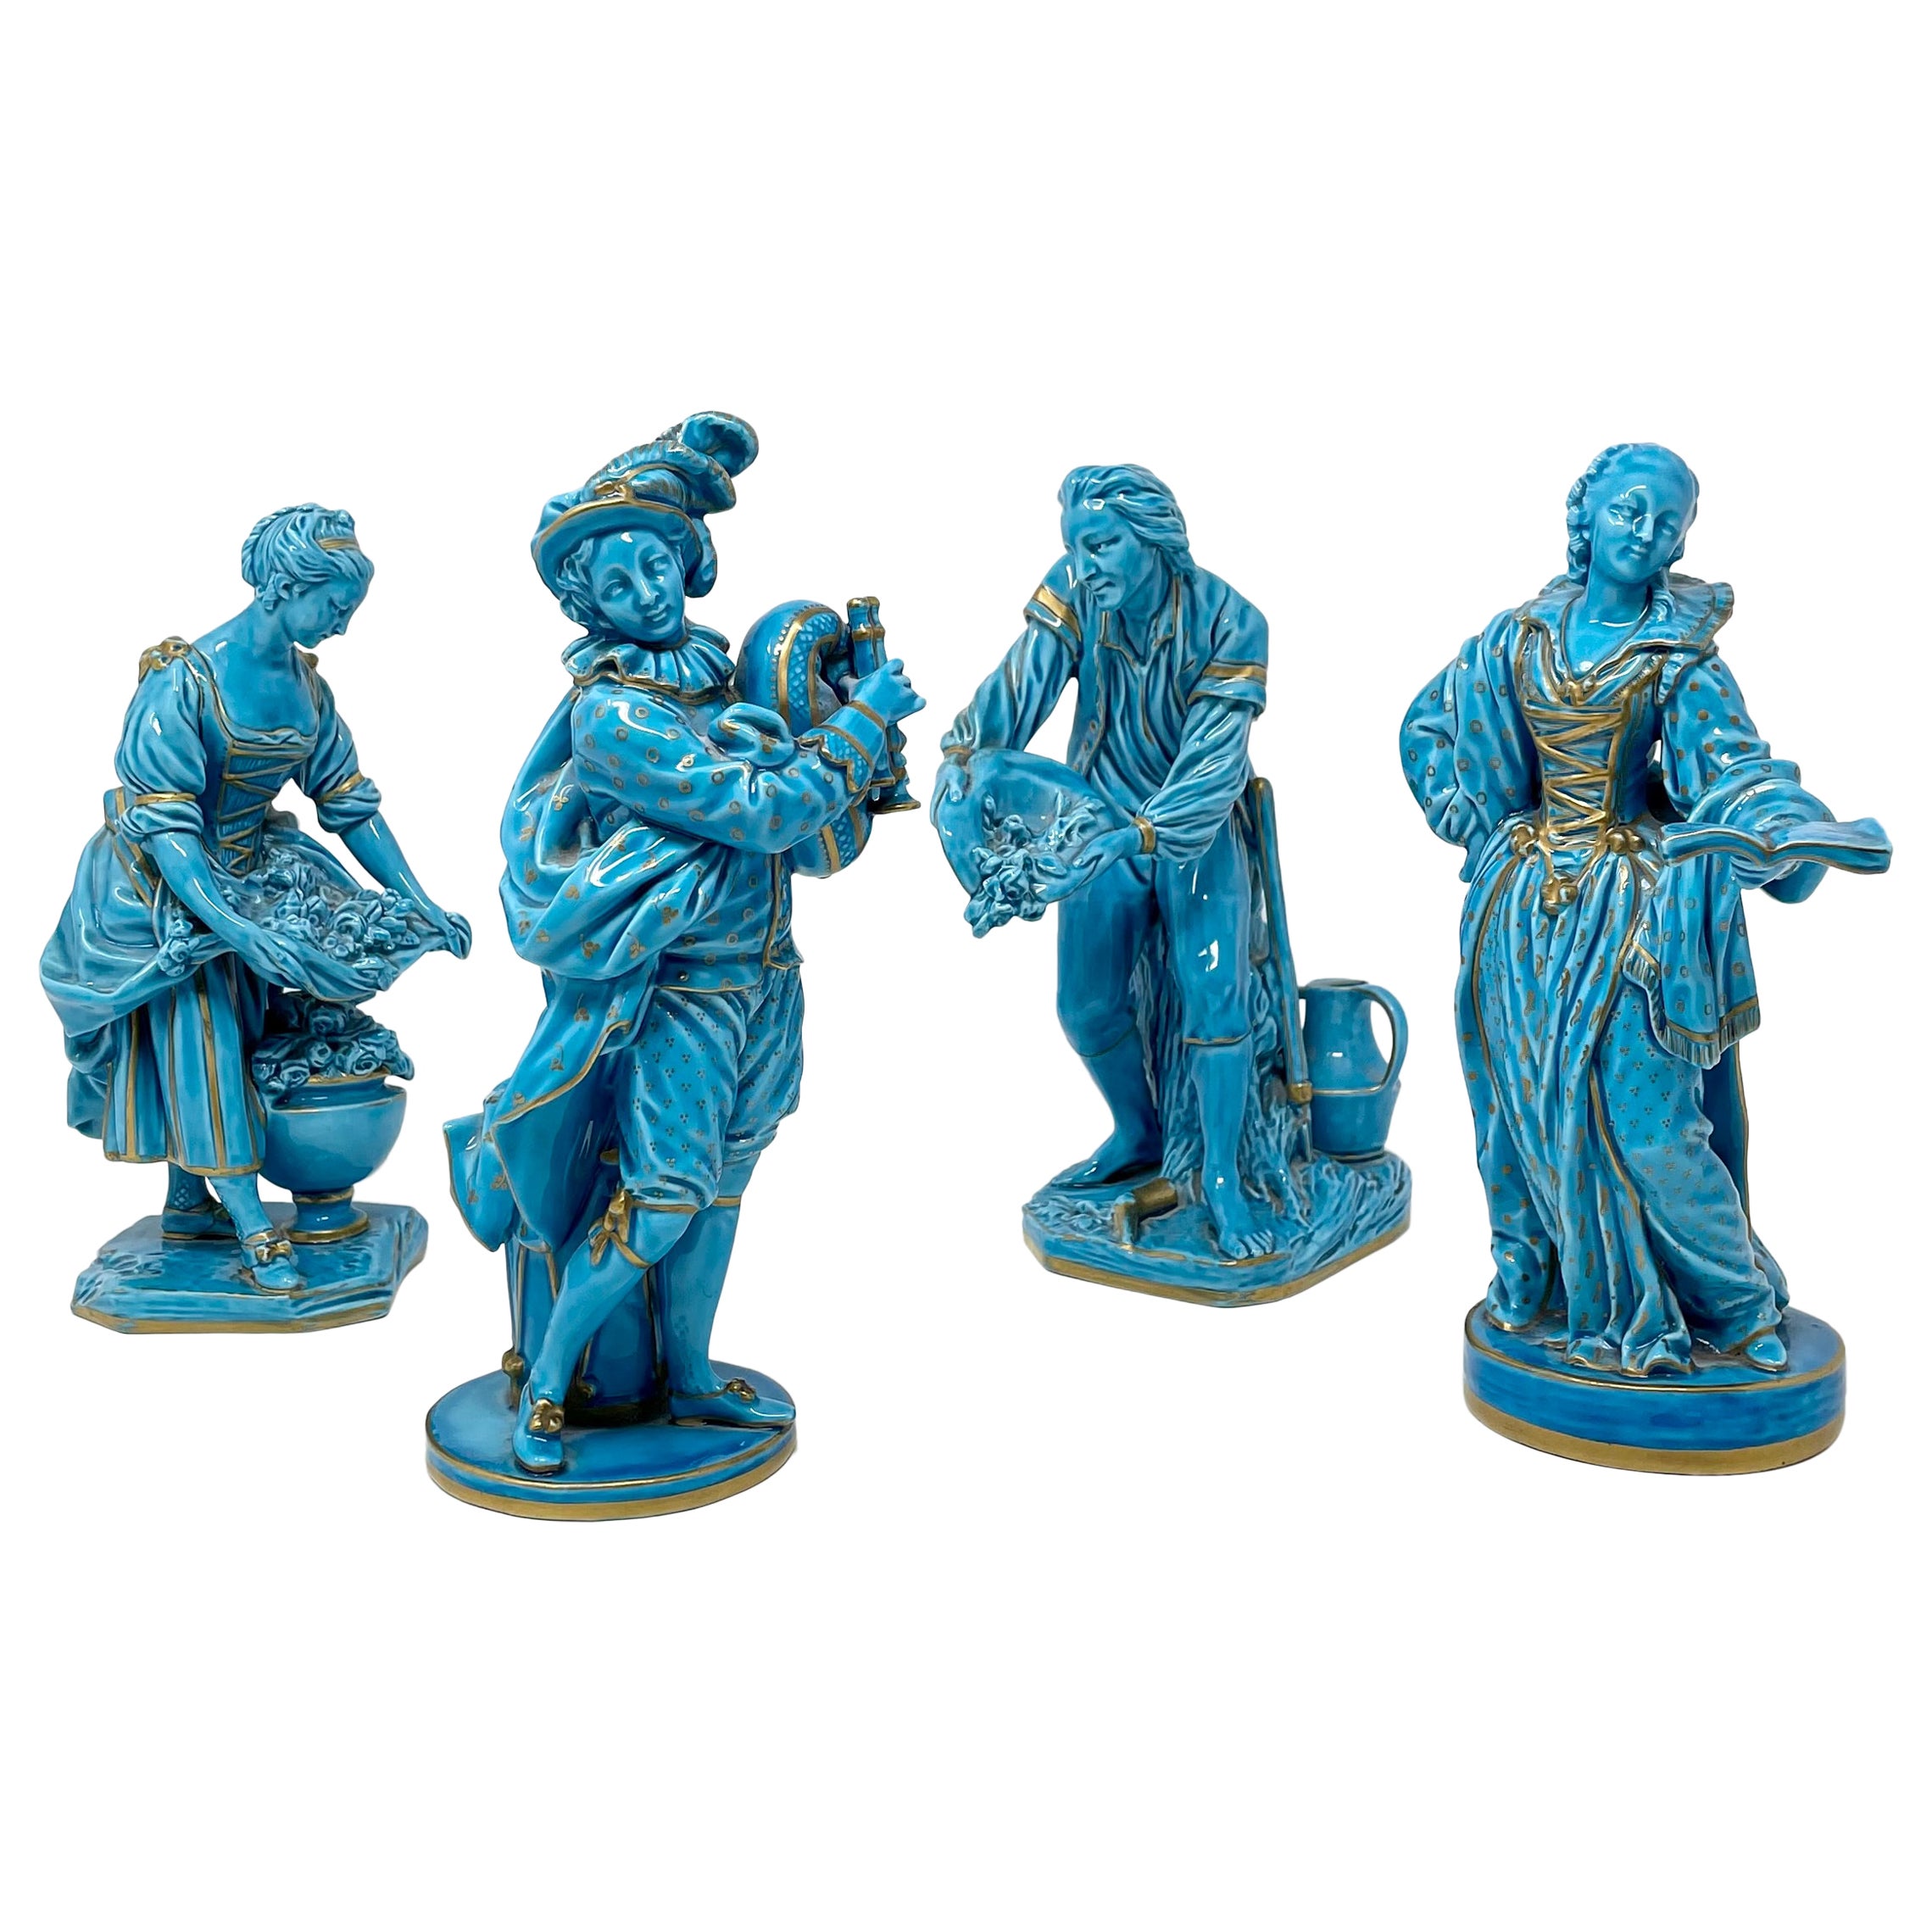 Set of 4 Antique French Porcelain Turquoise & Gold Table Figurines, Circa 1880. For Sale